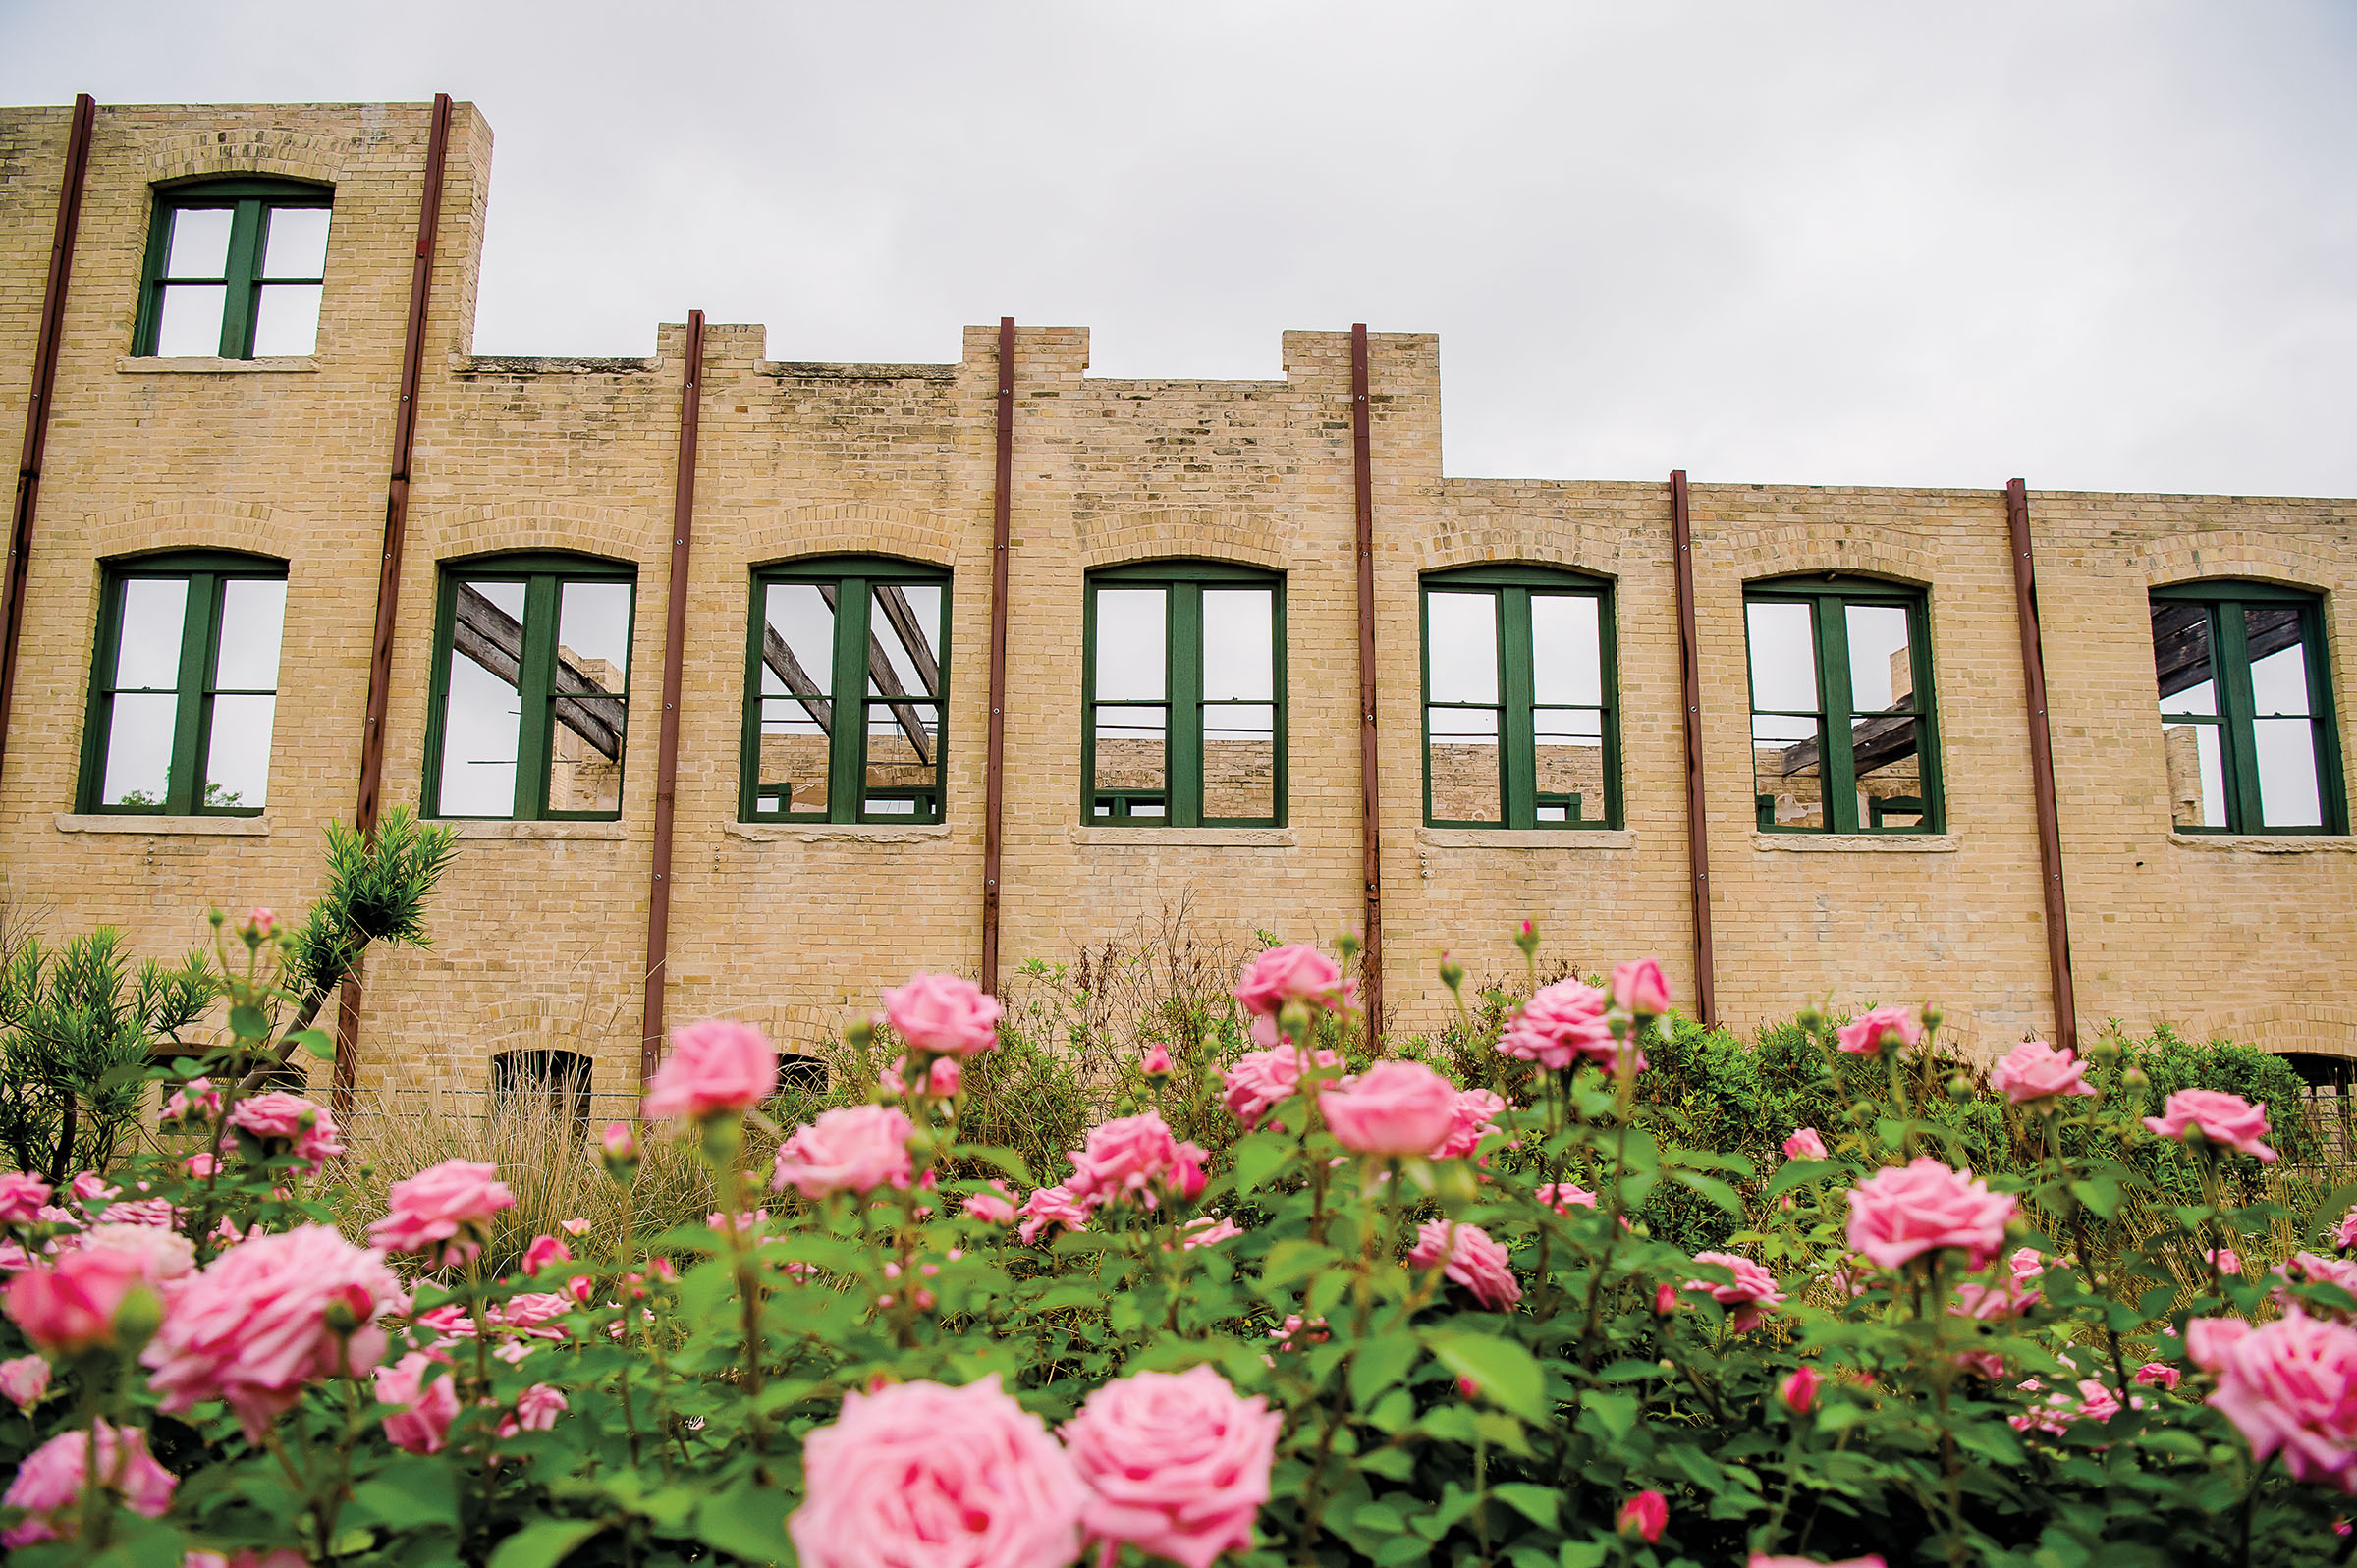 Tan brick columns and green-painted windows appear in the background against bright pink roses